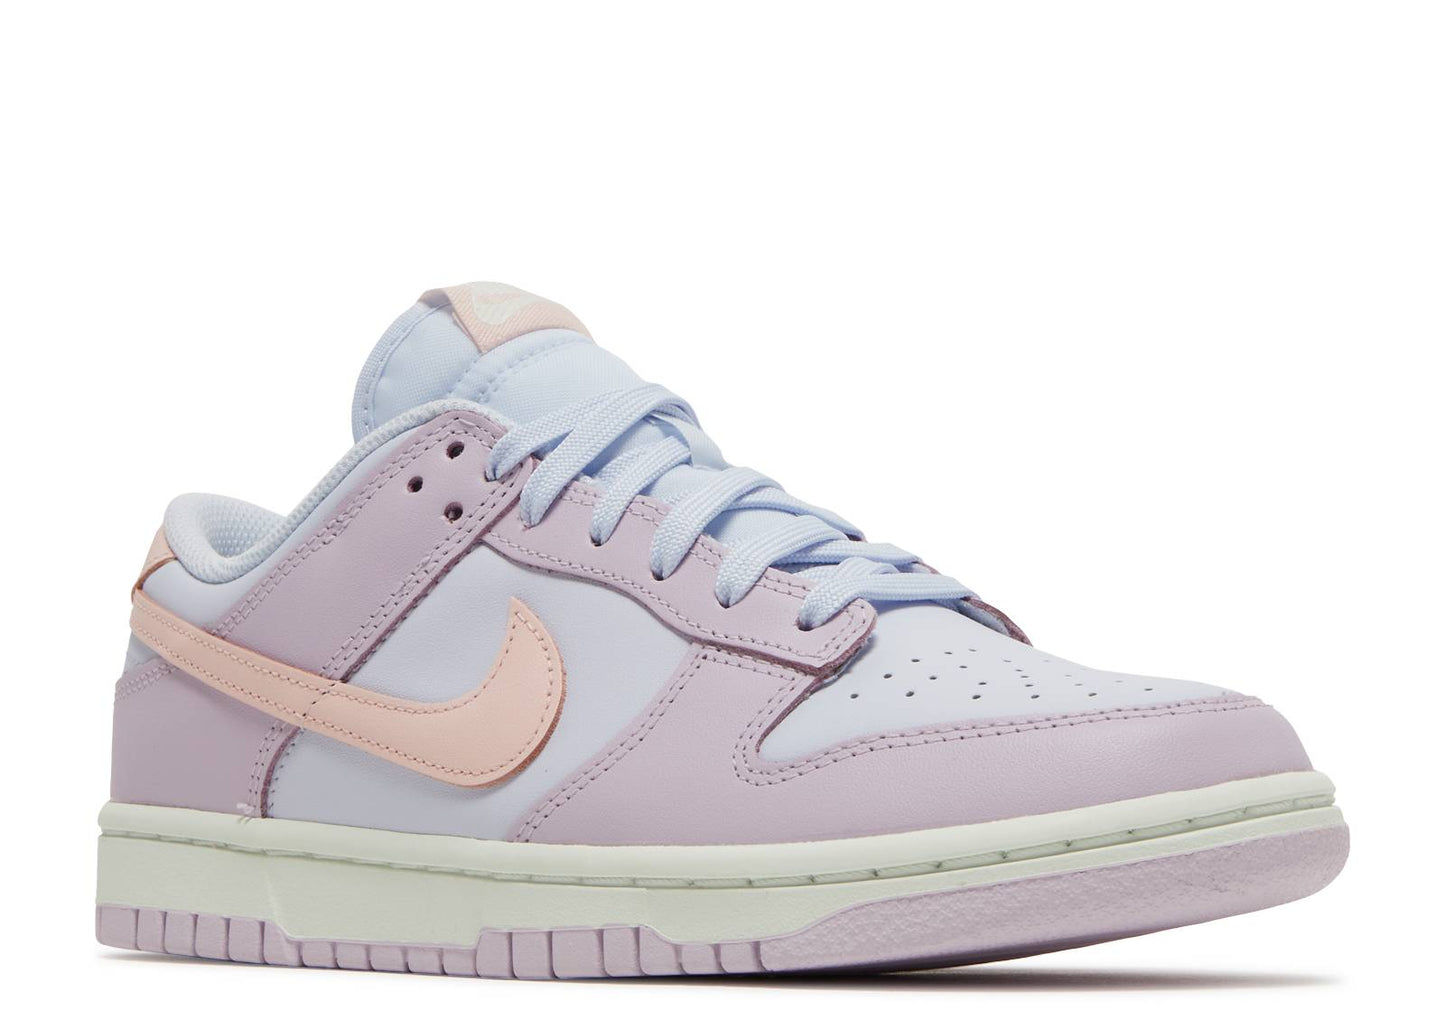 Nike Dunk Low WMNS "Easter"